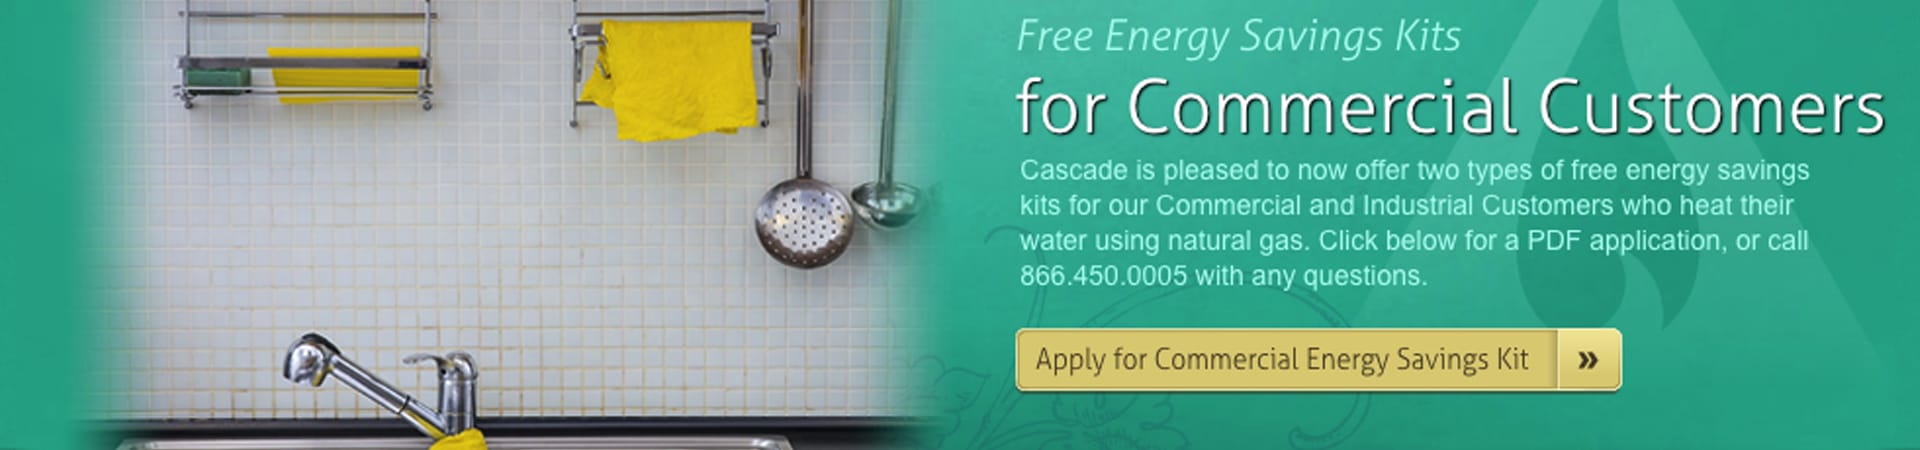 cascade-natural-gas-free-energy-savings-kit-for-commercial-customers